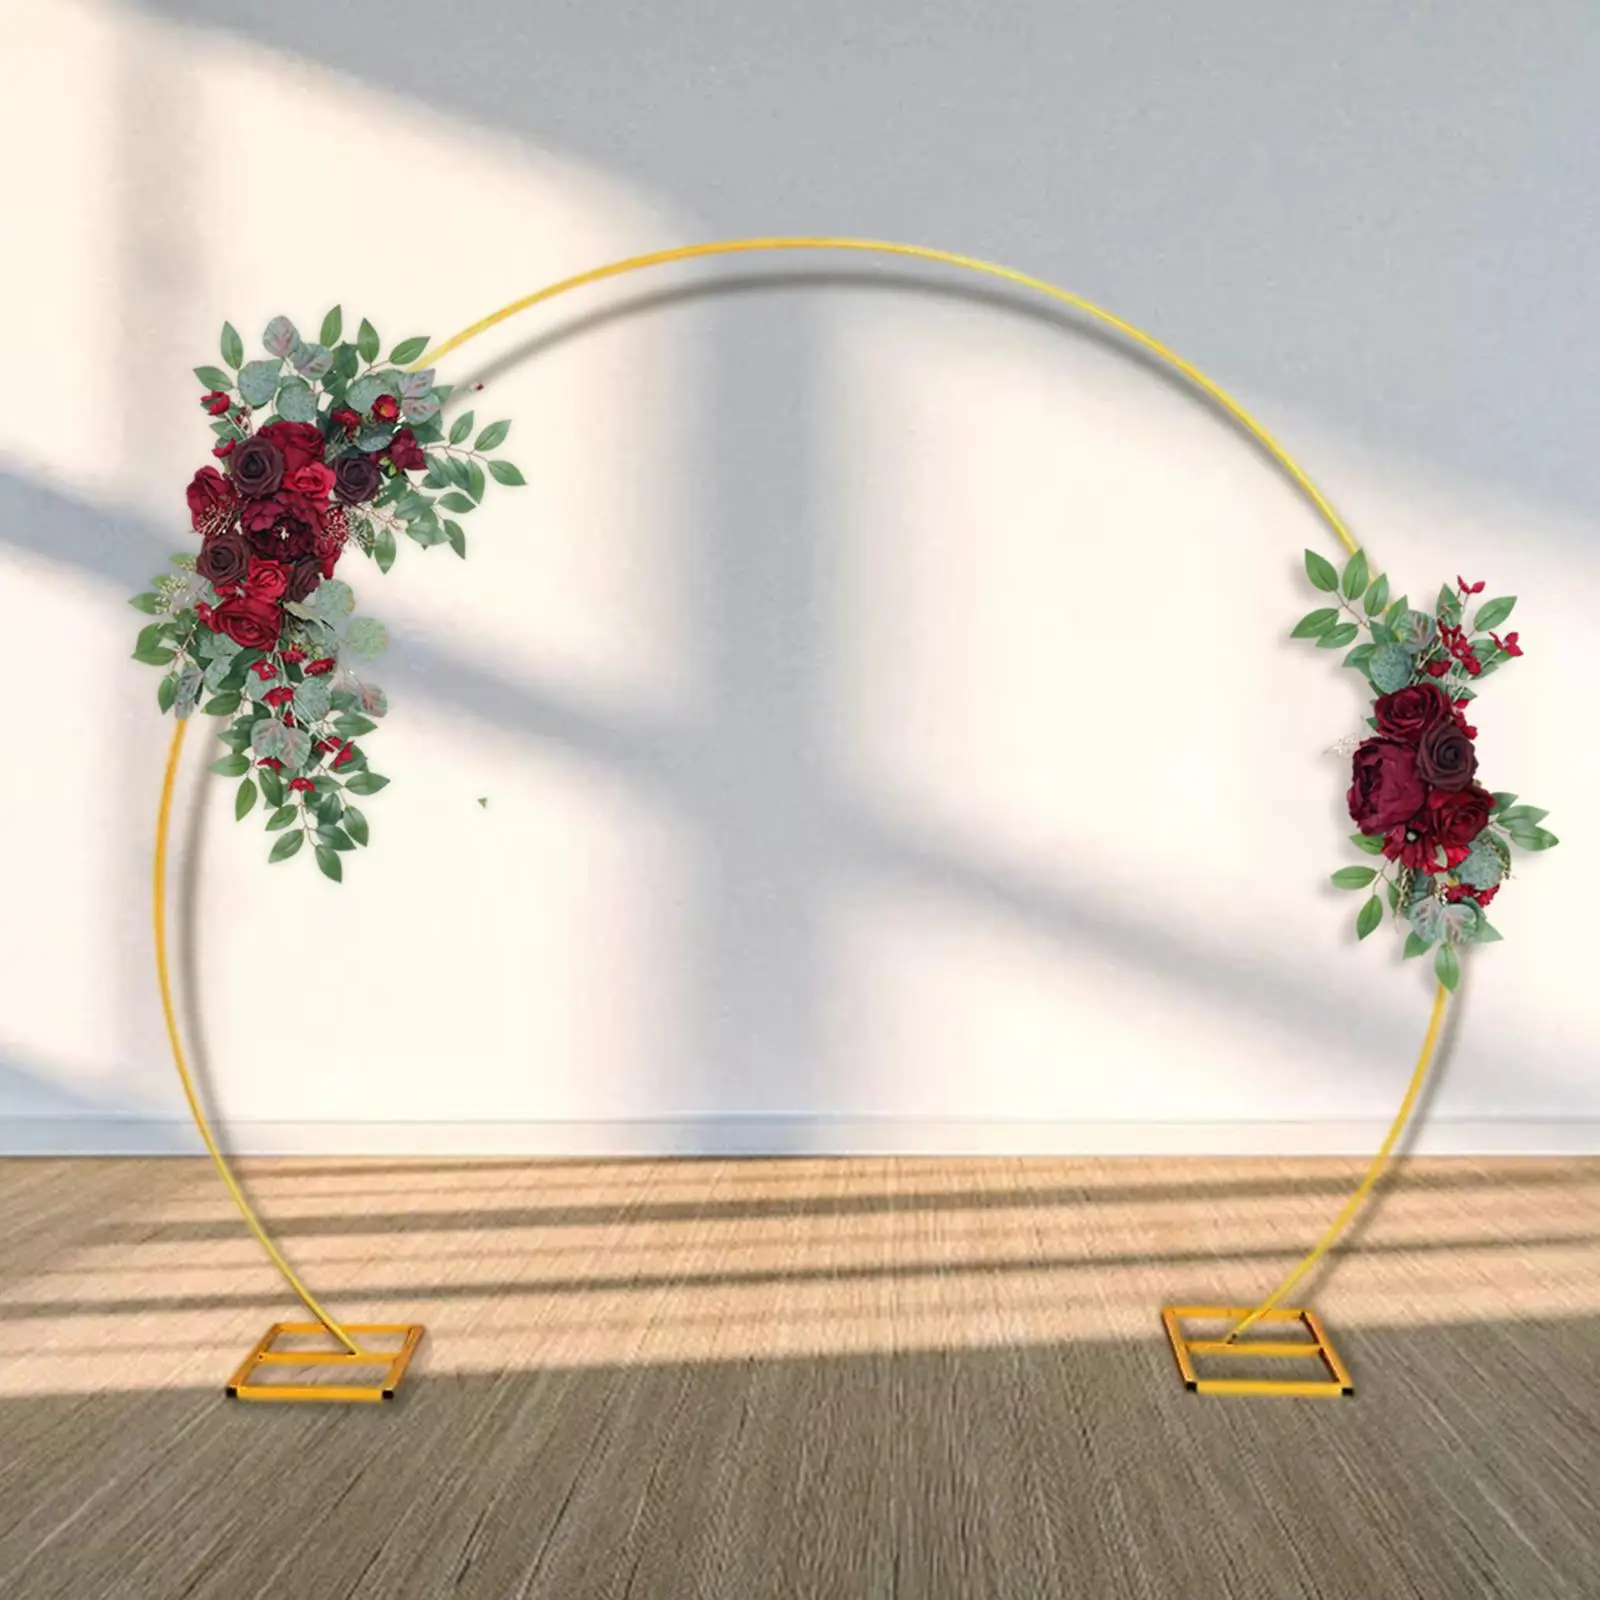 2 Pieces Artificial Flower Arch Rose Flower Wine Red Garland Props Handmade for Wedding Door Ceremony Backdrop Wall Exhibition